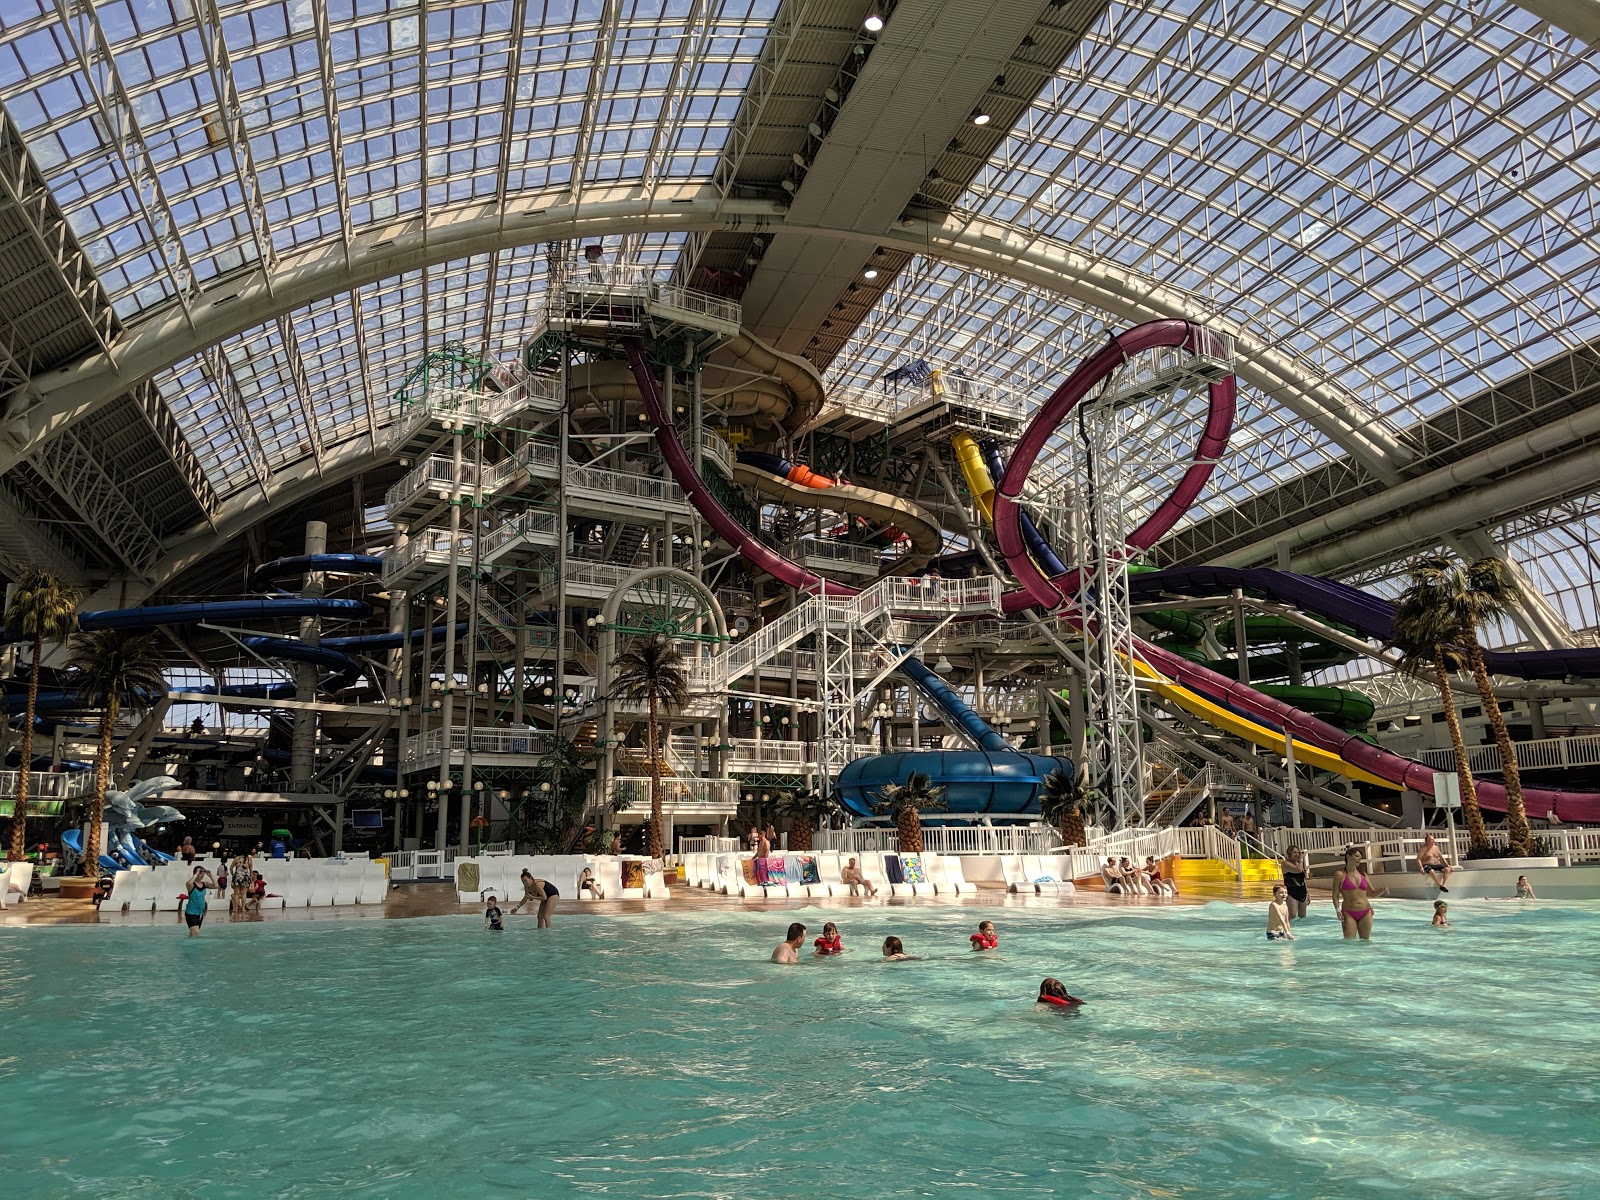 World Waterpark At West Edmonton Mall WhiteWater, 55% OFF